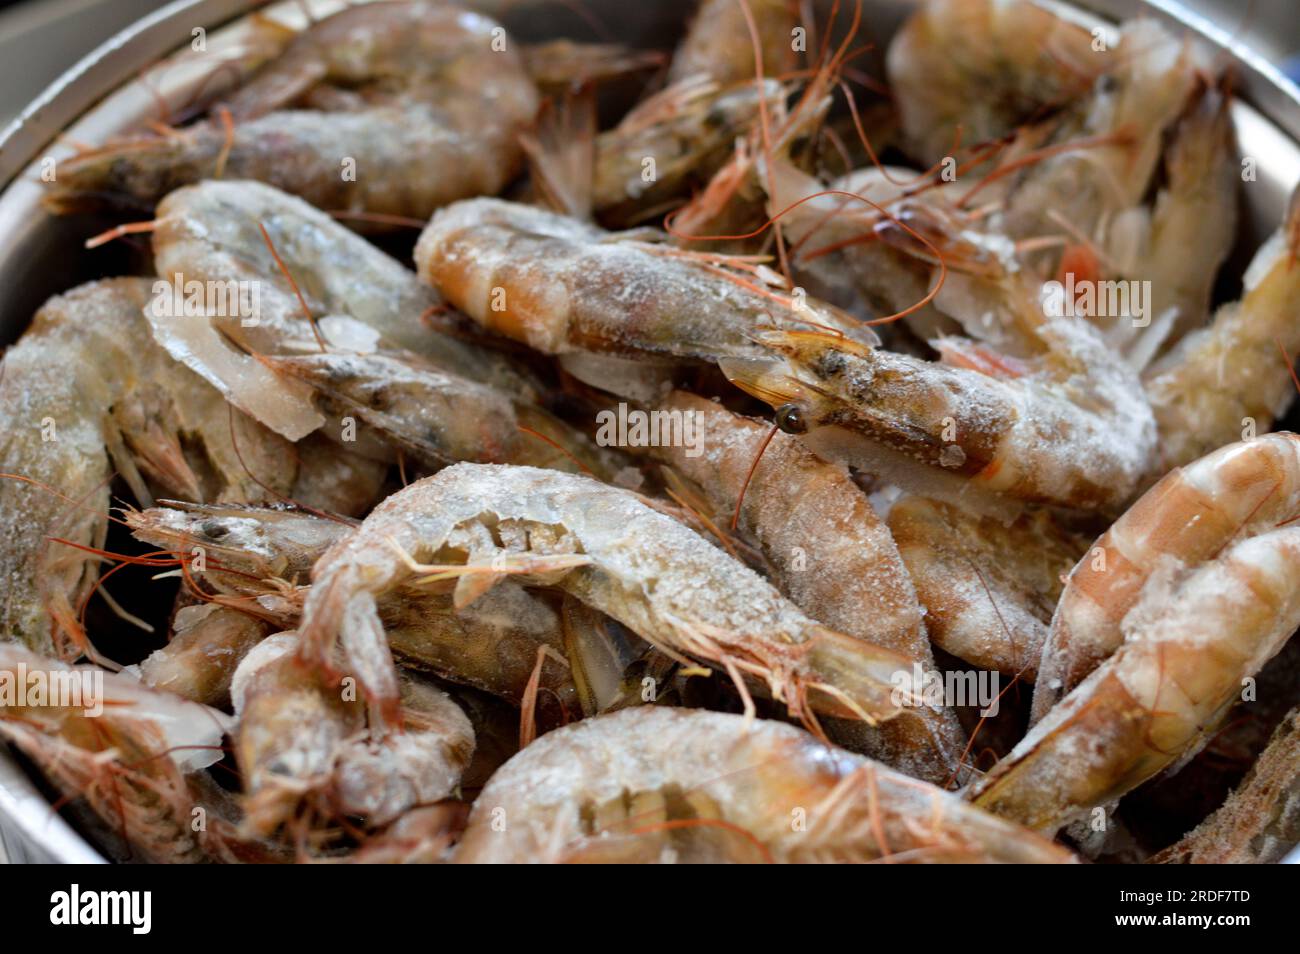 Pile of raw frozen shrimps, a crustacean (a form of shellfish) with an elongated body and a primarily swimming mode of locomotion, Caridea or Dendrobr Stock Photo